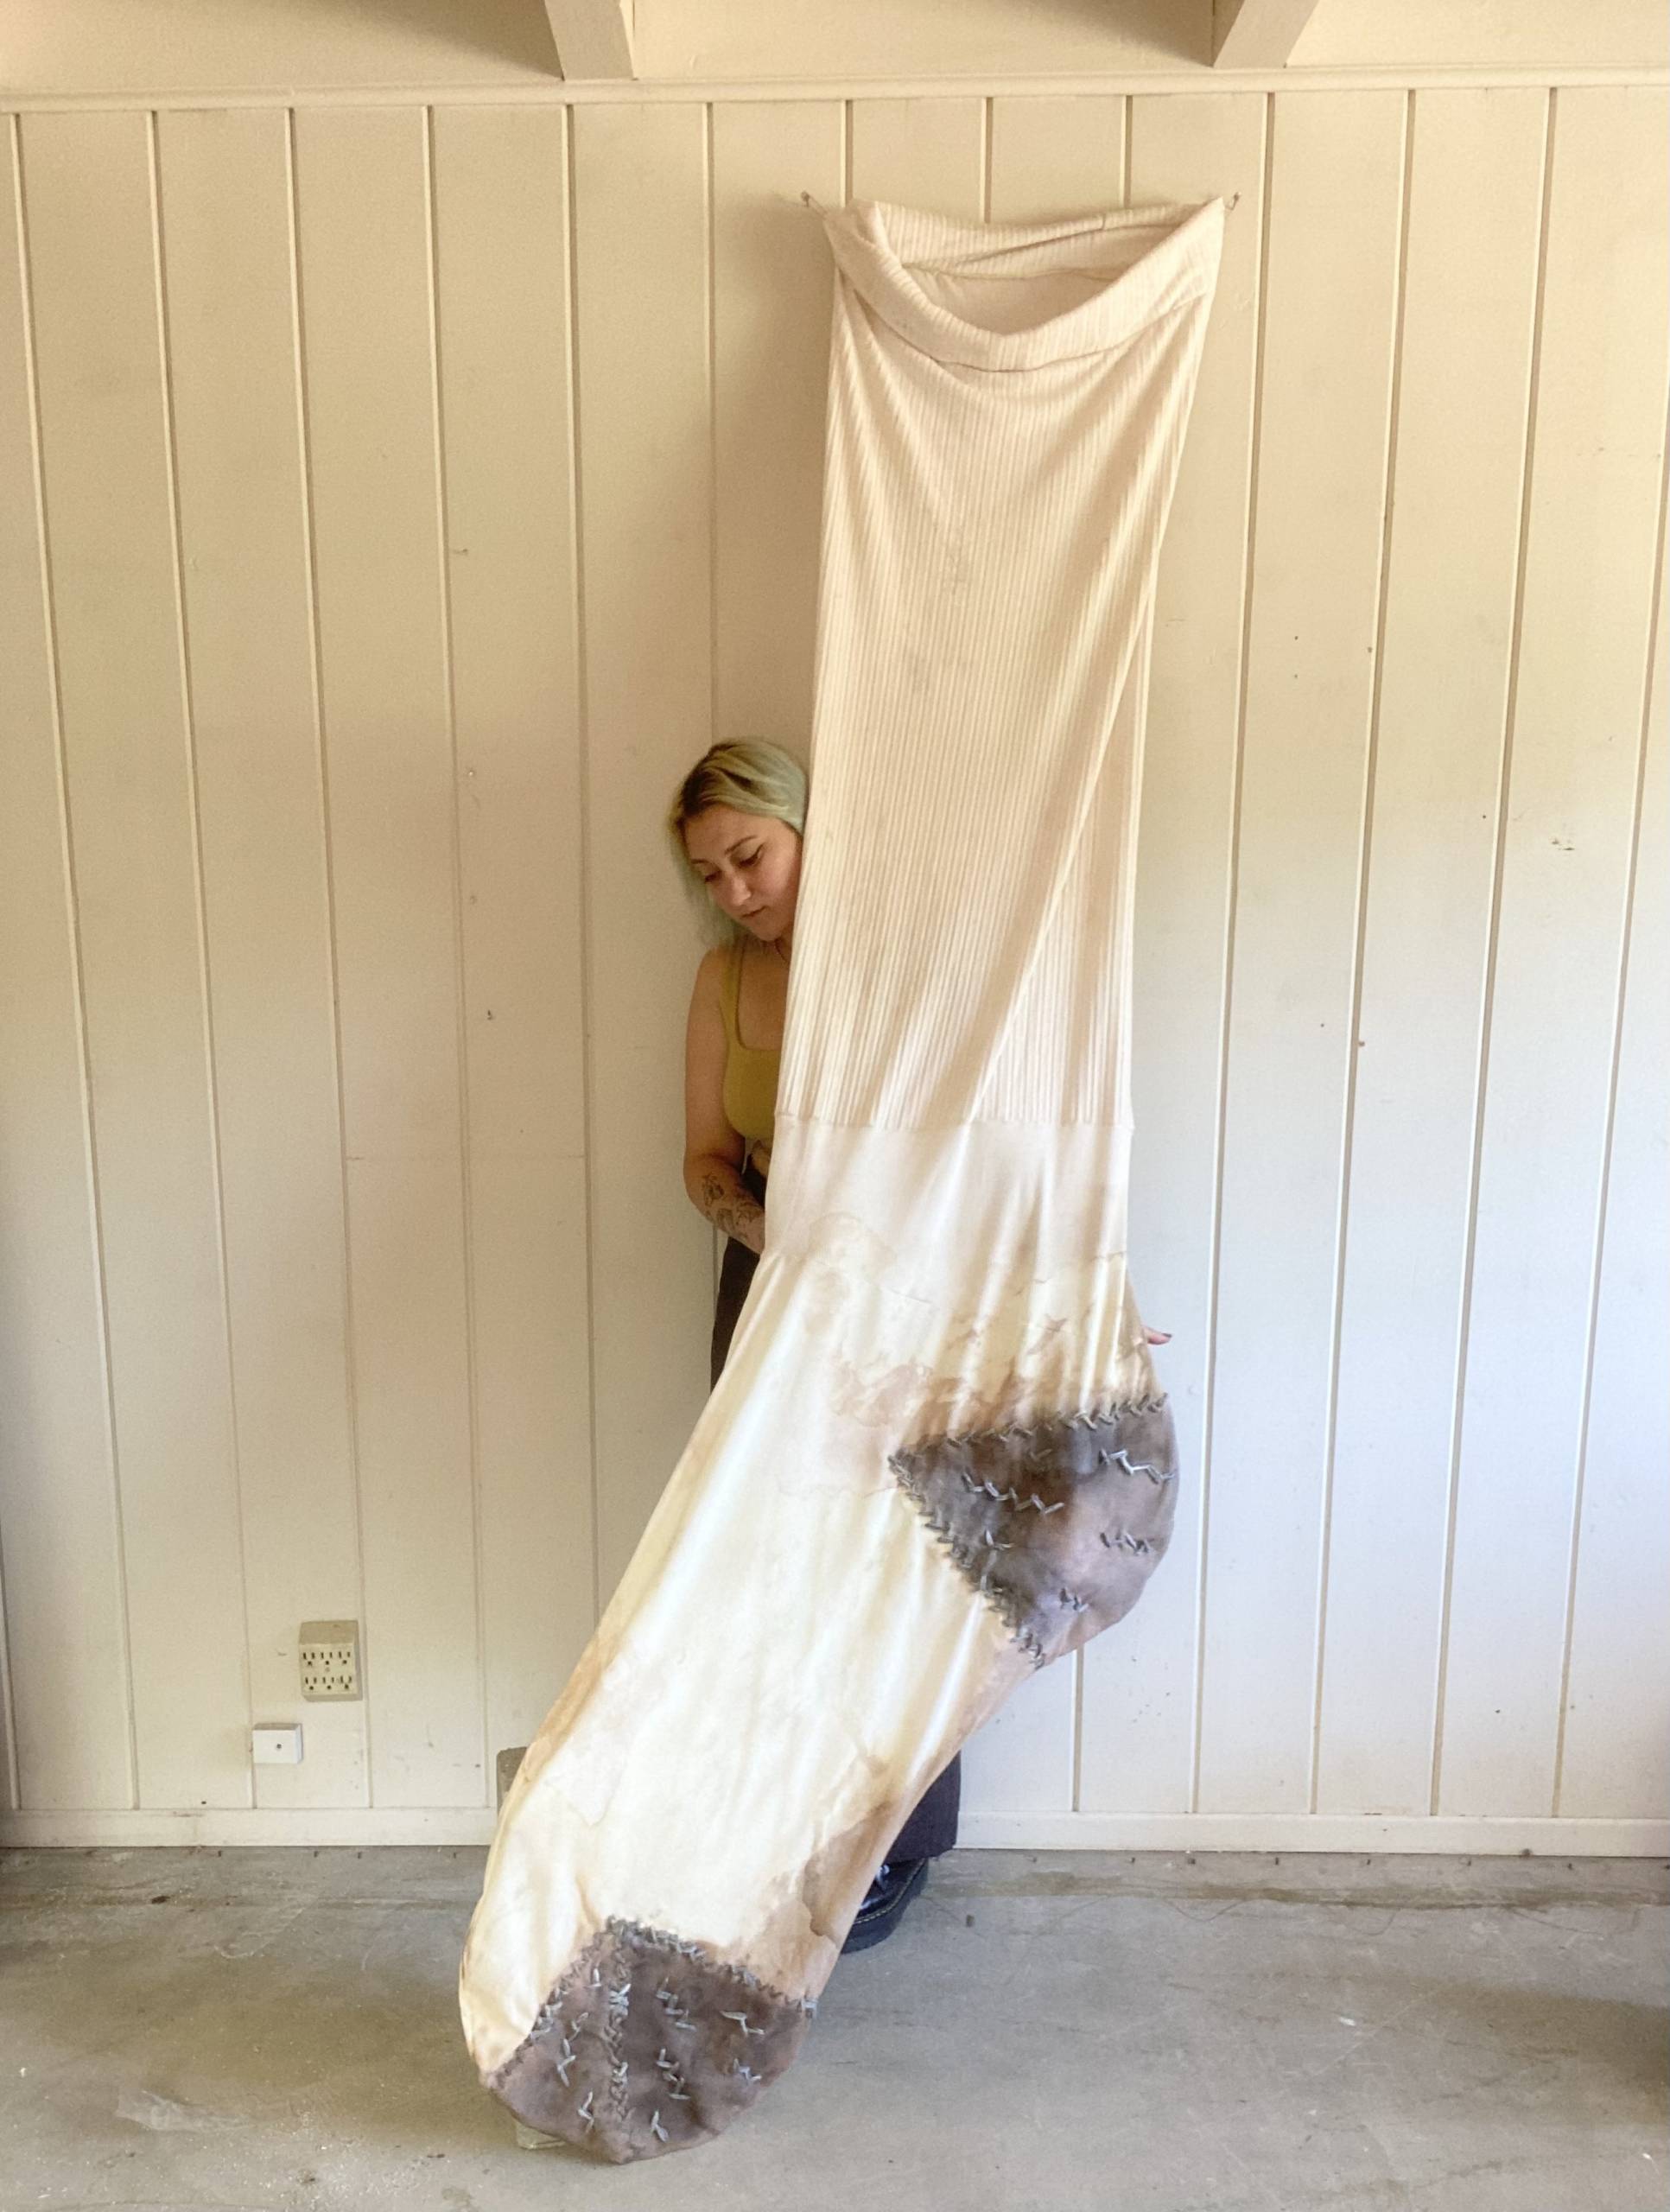 Image of giant white tube sock with shorter artist standing behind it